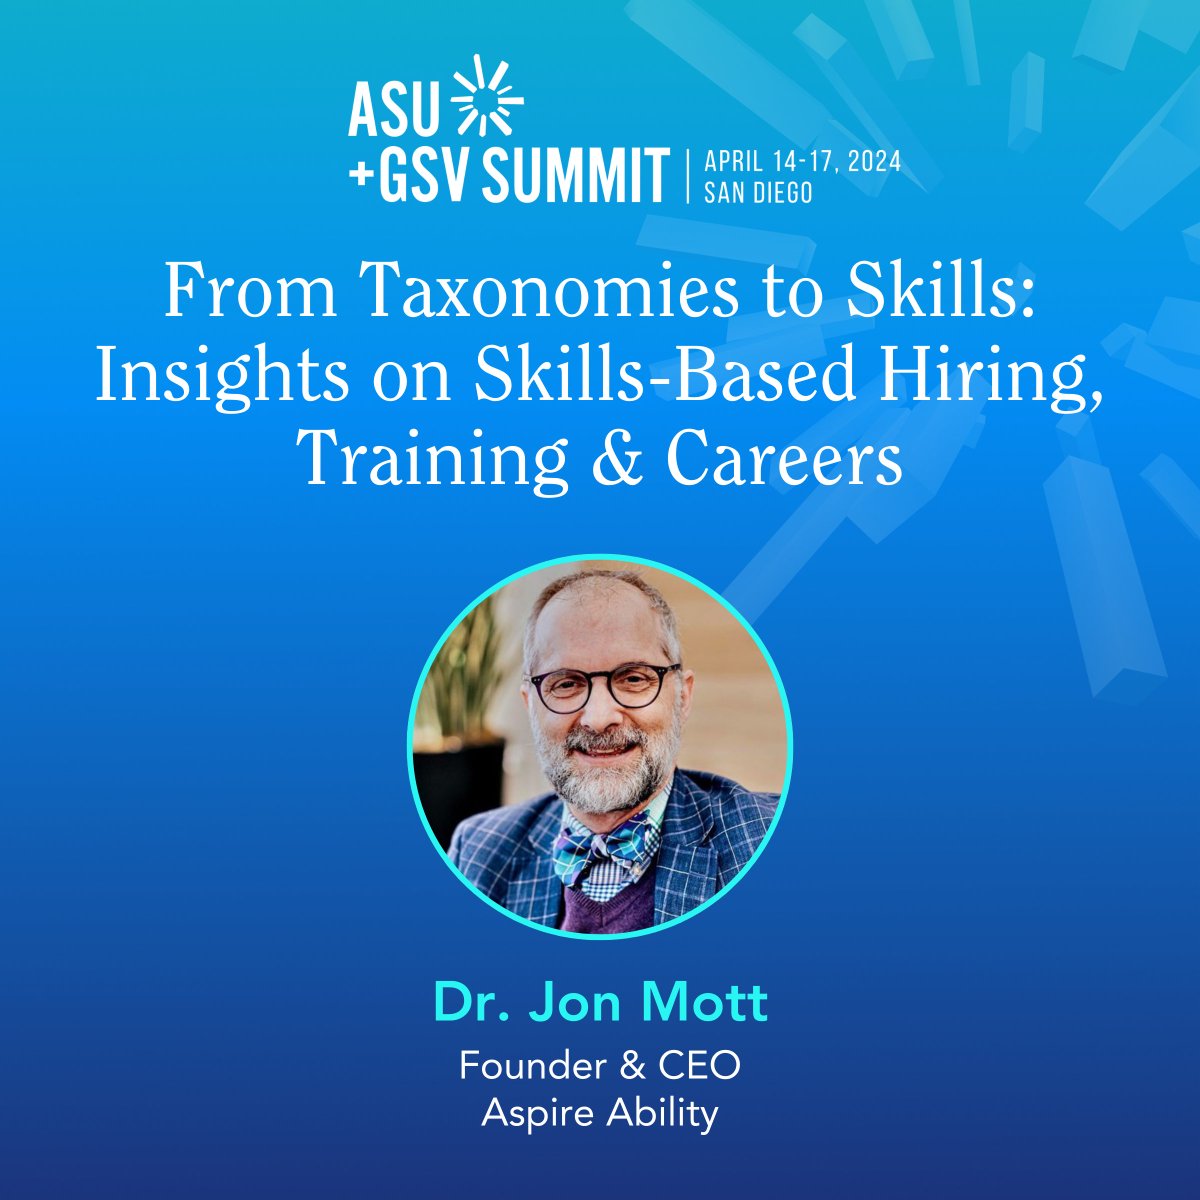 Join us at the #asugsvsummit Tuesday, April 16 at 2pm in Cortez Hill C, Level 3 for a session with Jon Mott, PhD, Founder and CEO of Aspire Ability! Save this page to stay updated: bit.ly/3VRBNzl